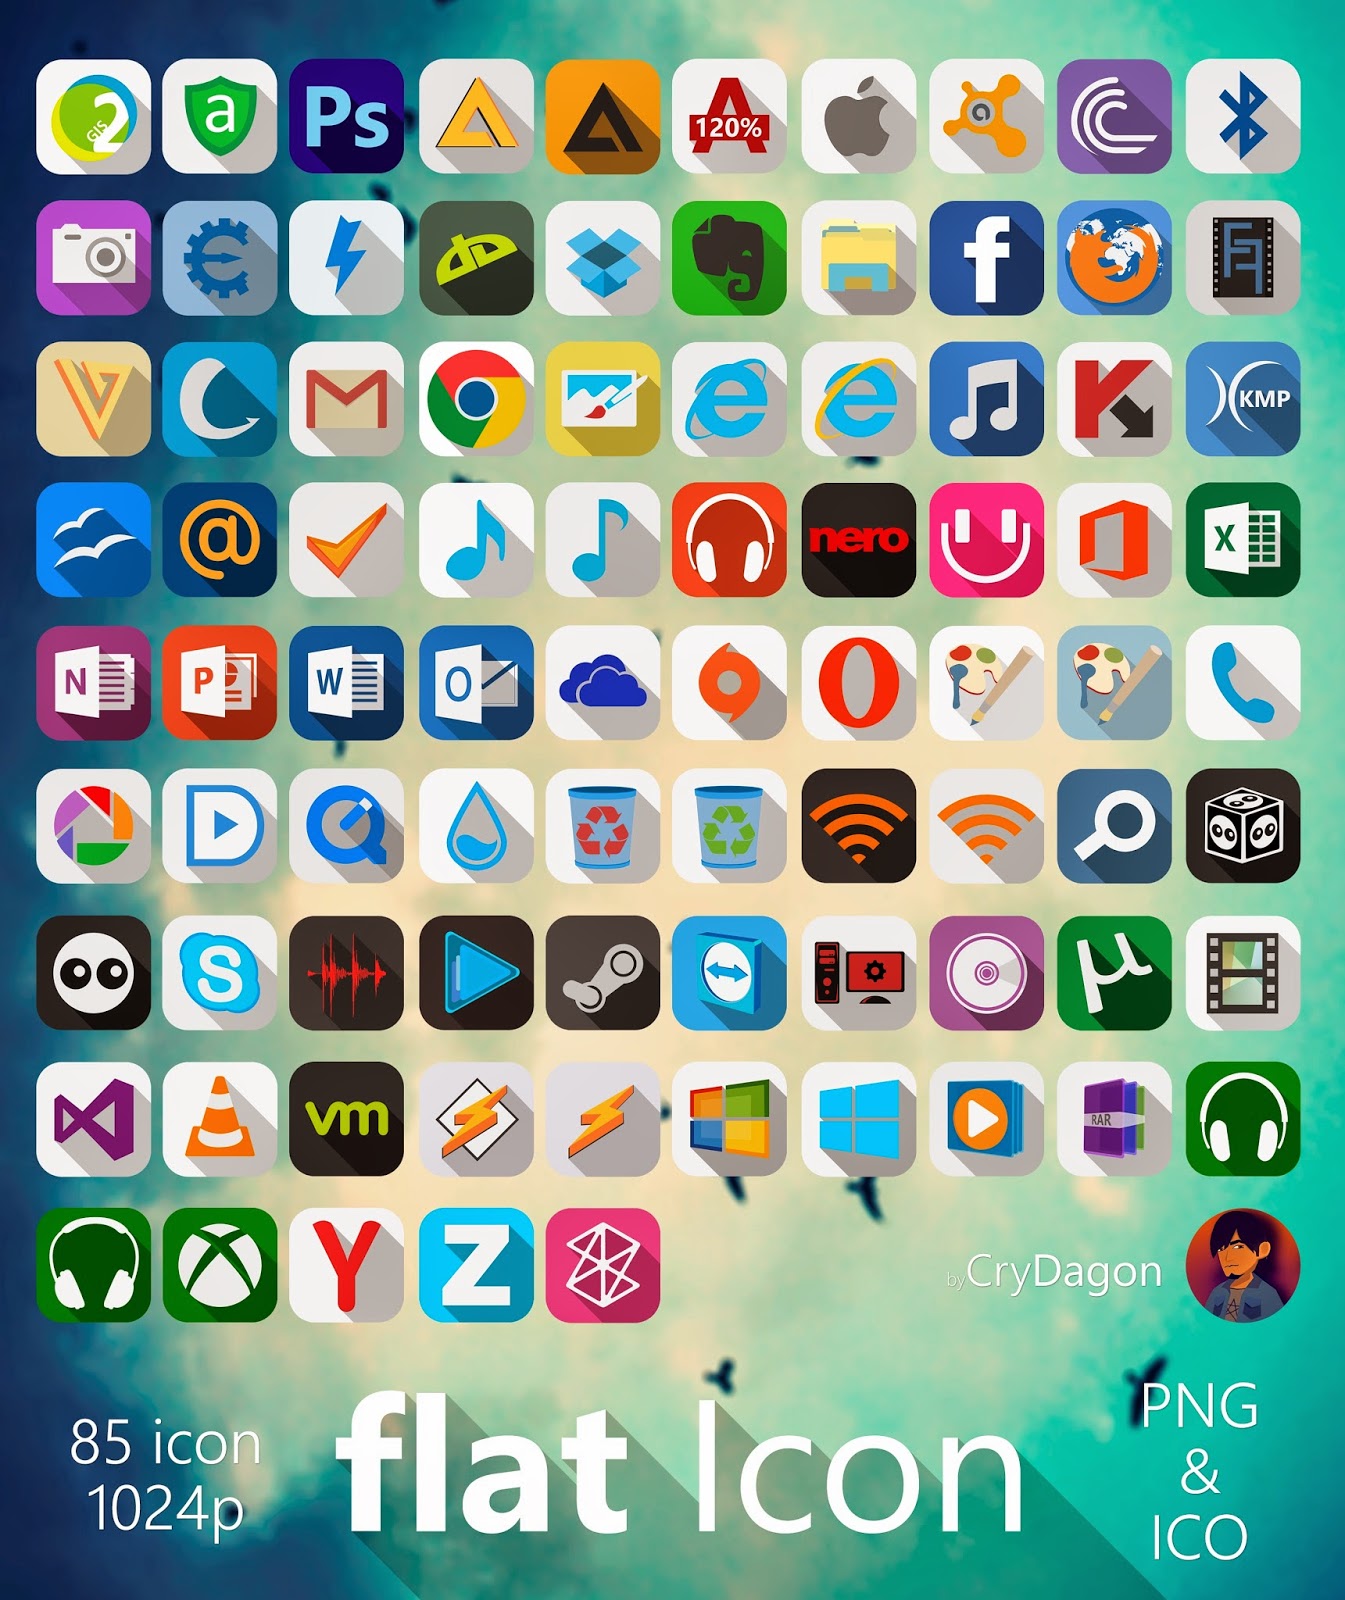 cool windows icon pack